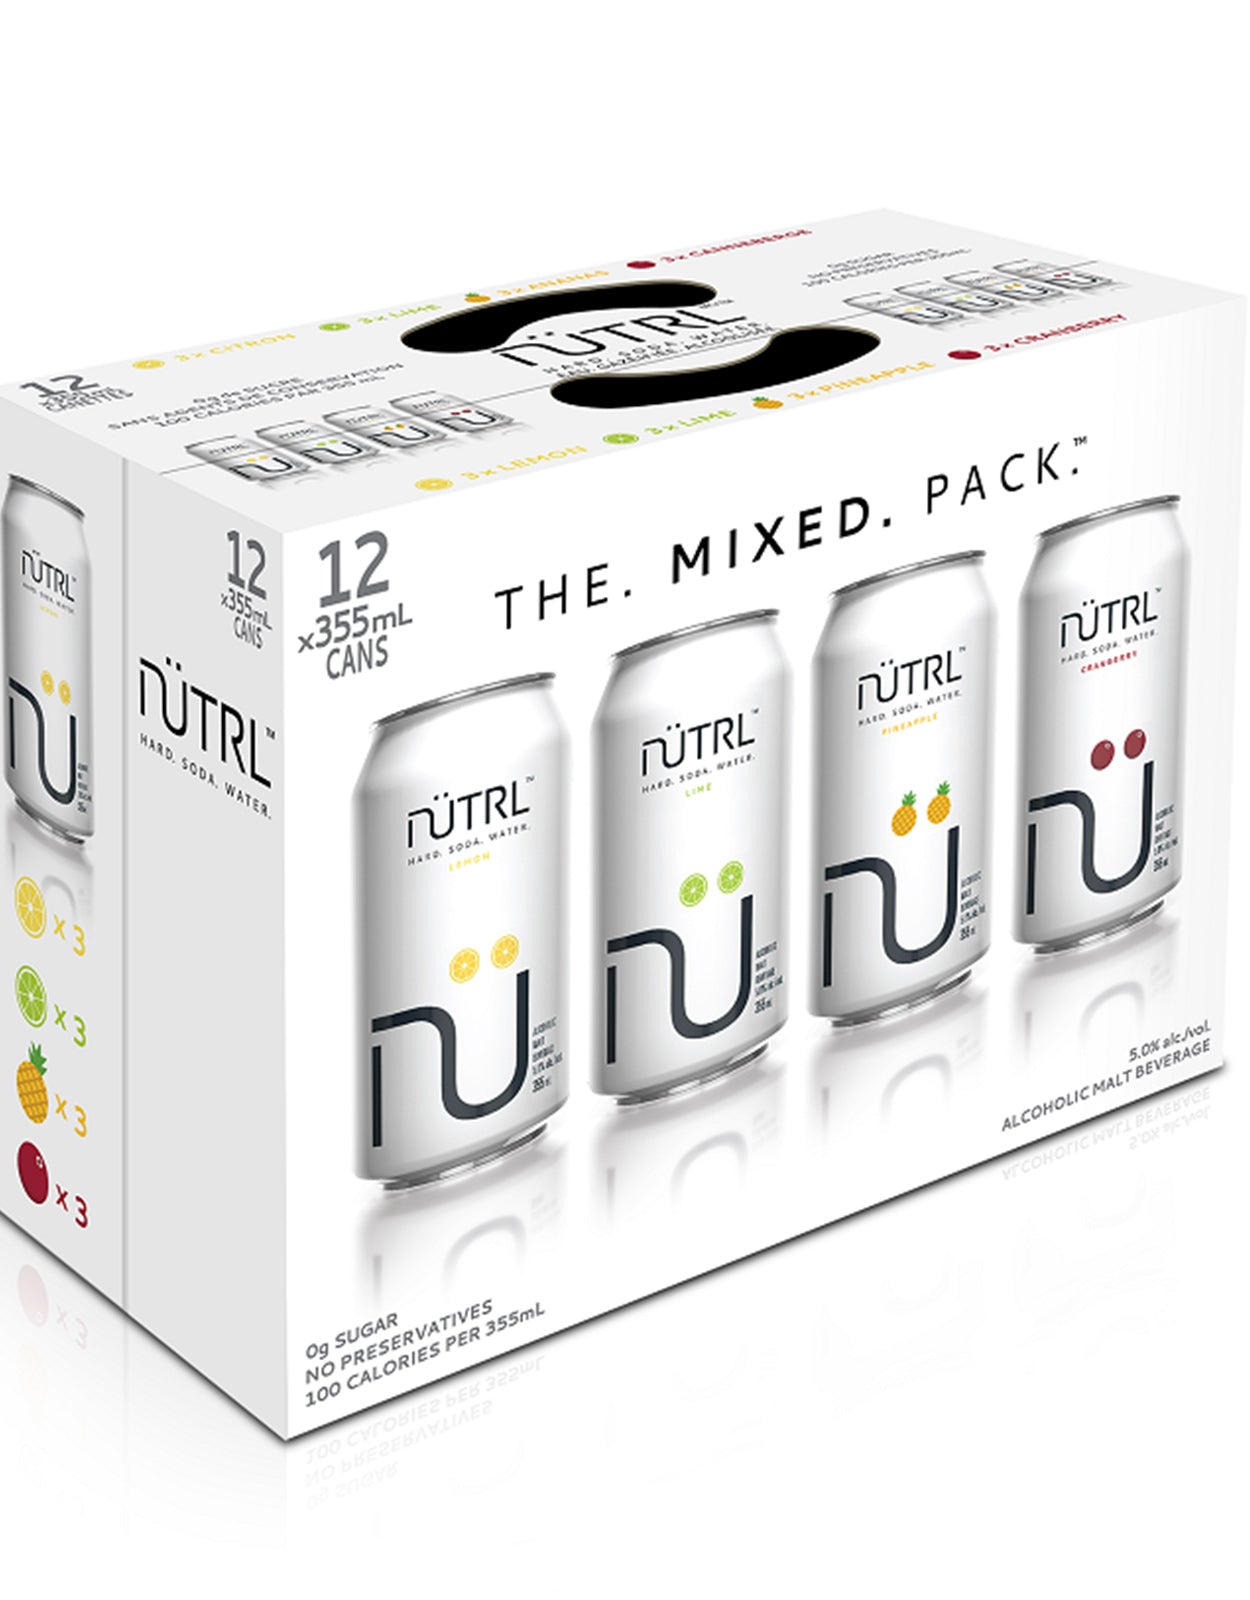 Nutrl Mix Pack 355 ml - 24 Cans